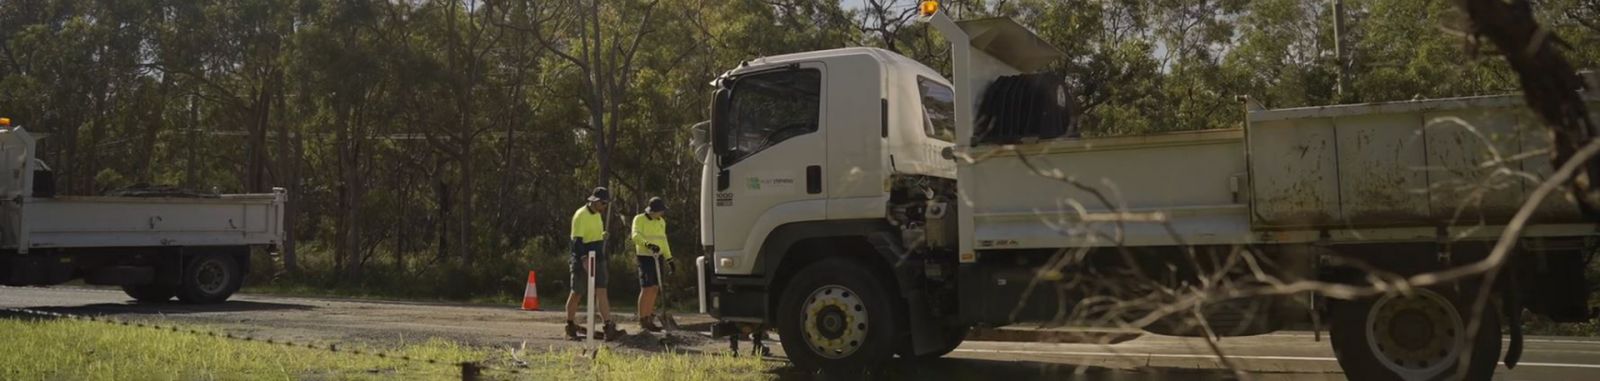 Port stephens Council truck and workers reparing the road banner image